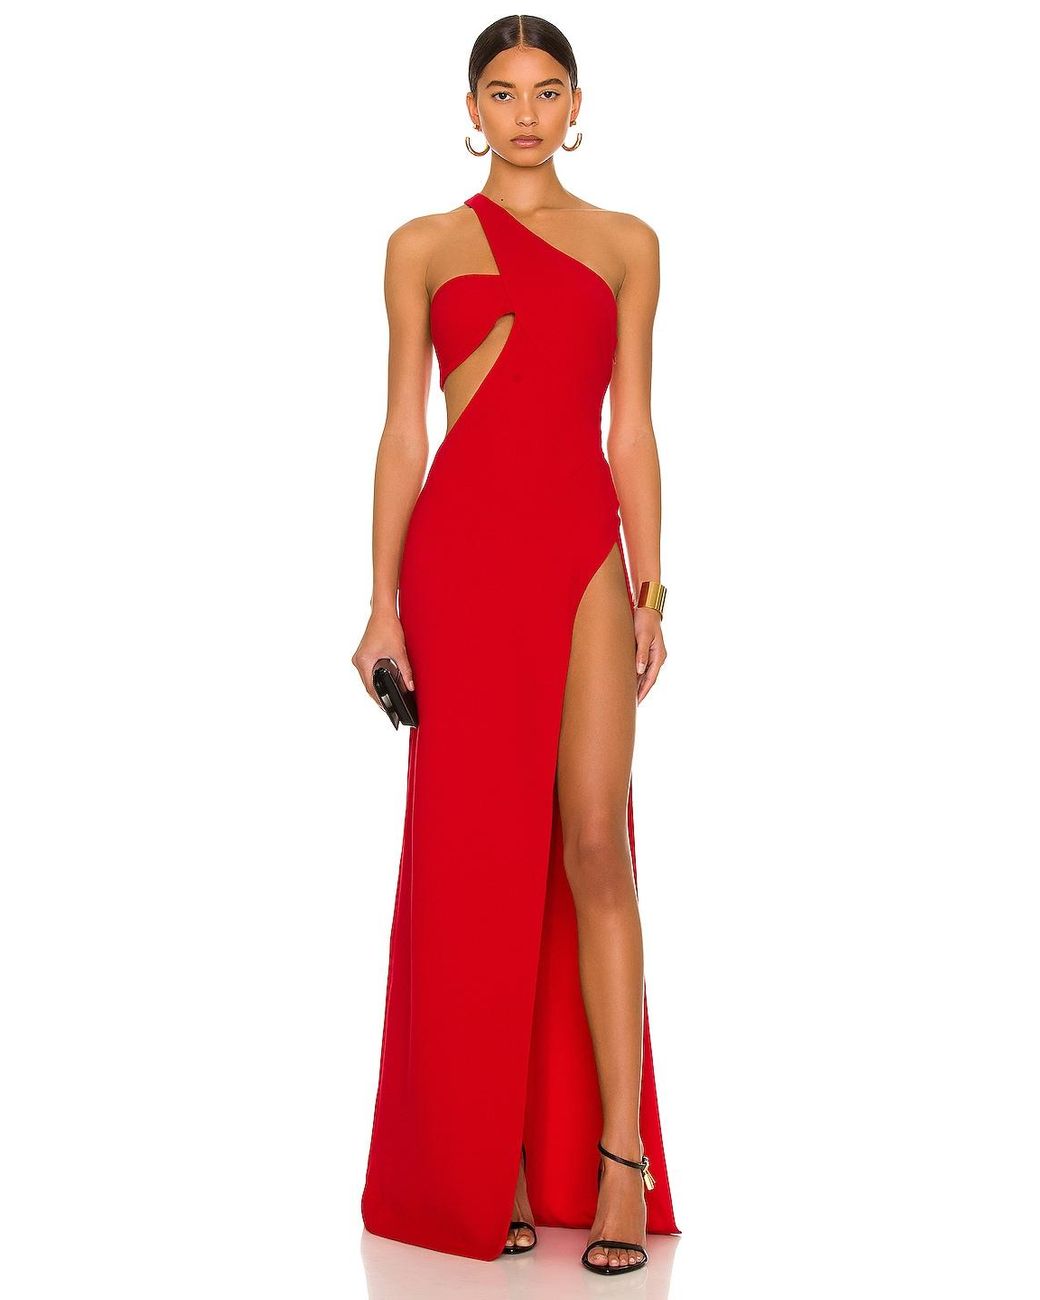 Monot Shoulder Cut Gown in Red